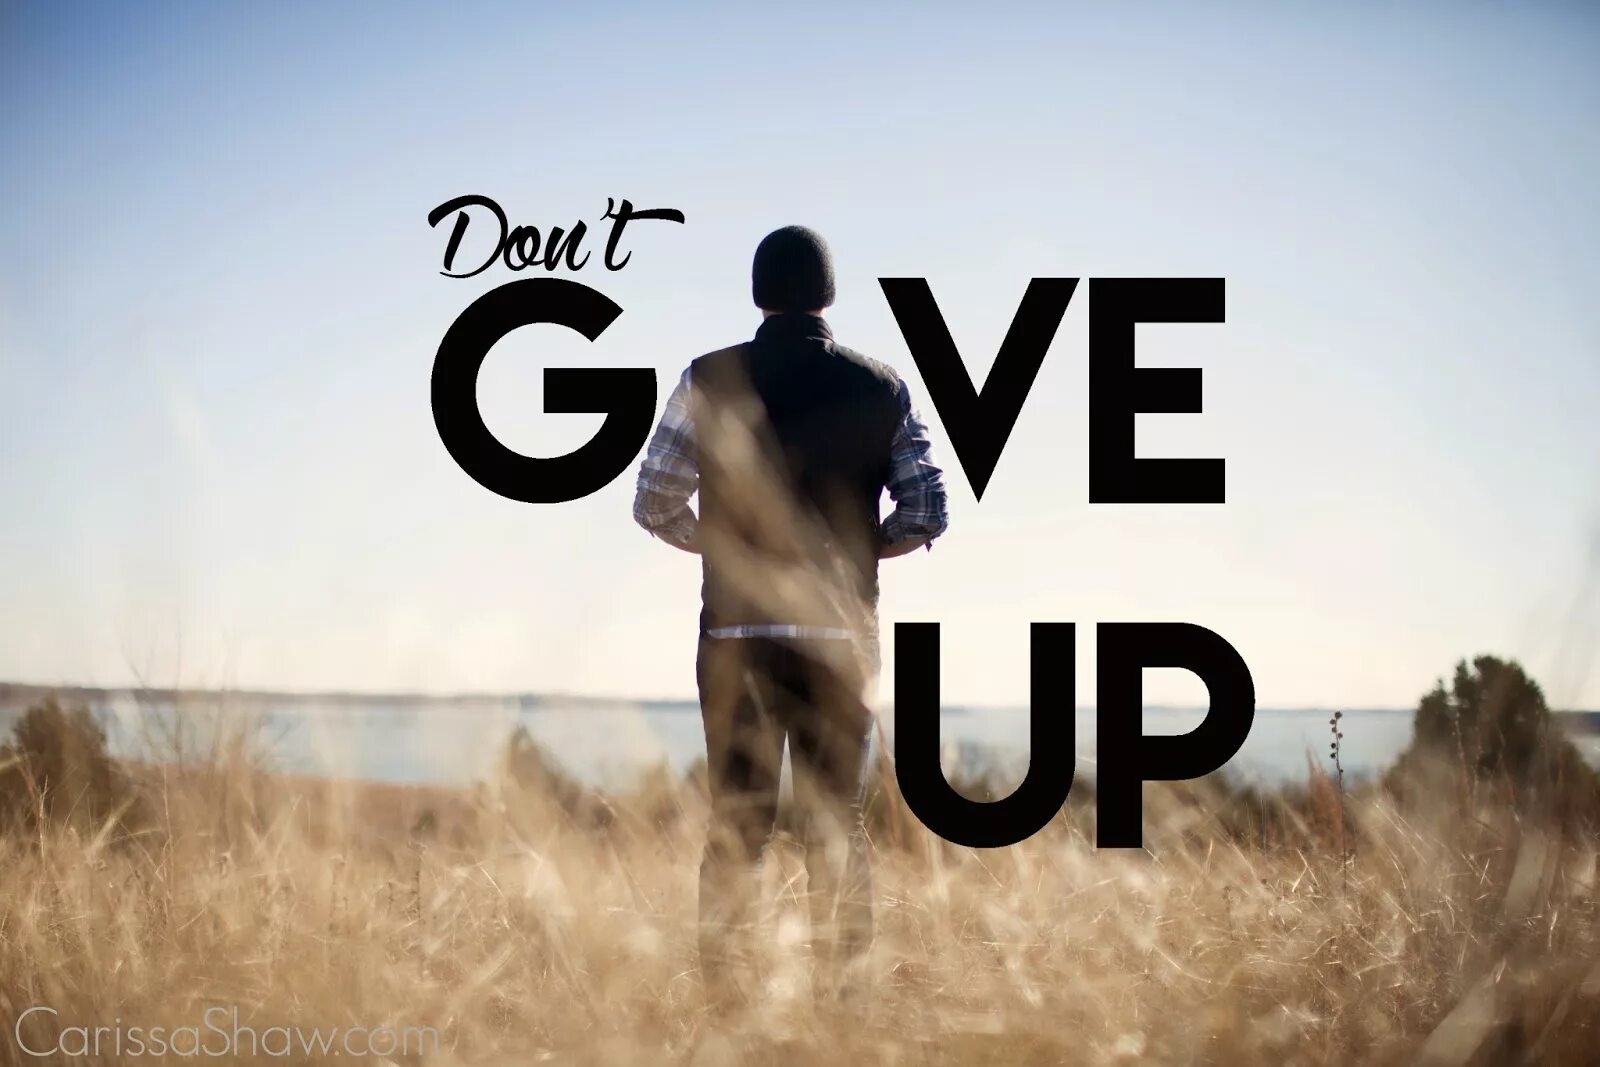 Don`t give up. Don't give up картинка. Надпись don't give up. Never give up картинки. Never like you can